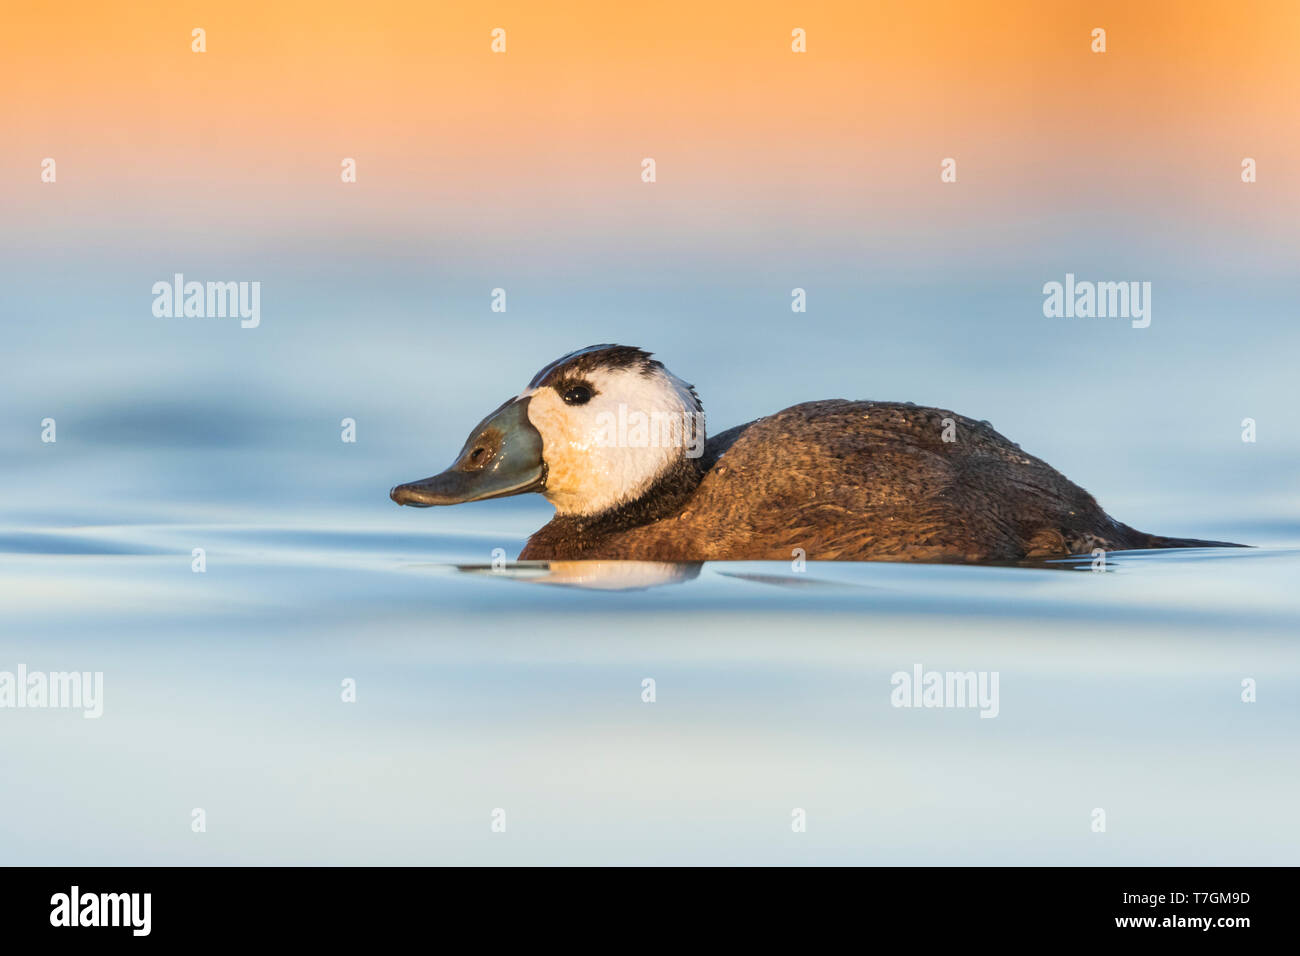 Adult male White-headed Duck (Oxyura leucocephala) swimming with beautiful evening light on a blue colored lake in a nature reserve in Spain. Side vie Stock Photo